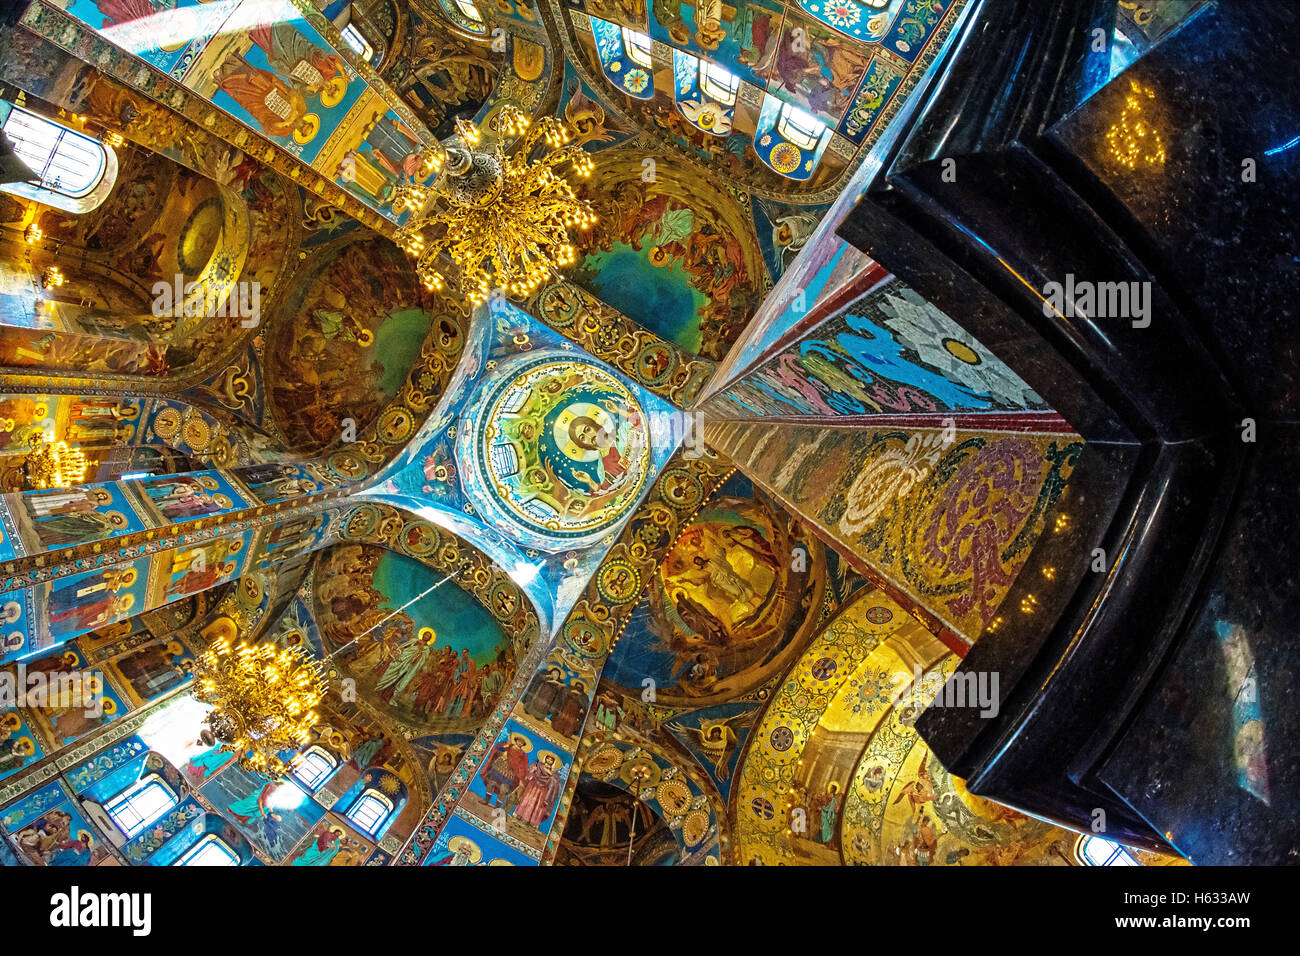 ST. PETERSBURG, RUSSIA - JULY 14, 2016: Interior of Church of the Savior on Spilled Blood. Architectural landmark and monument t Stock Photo